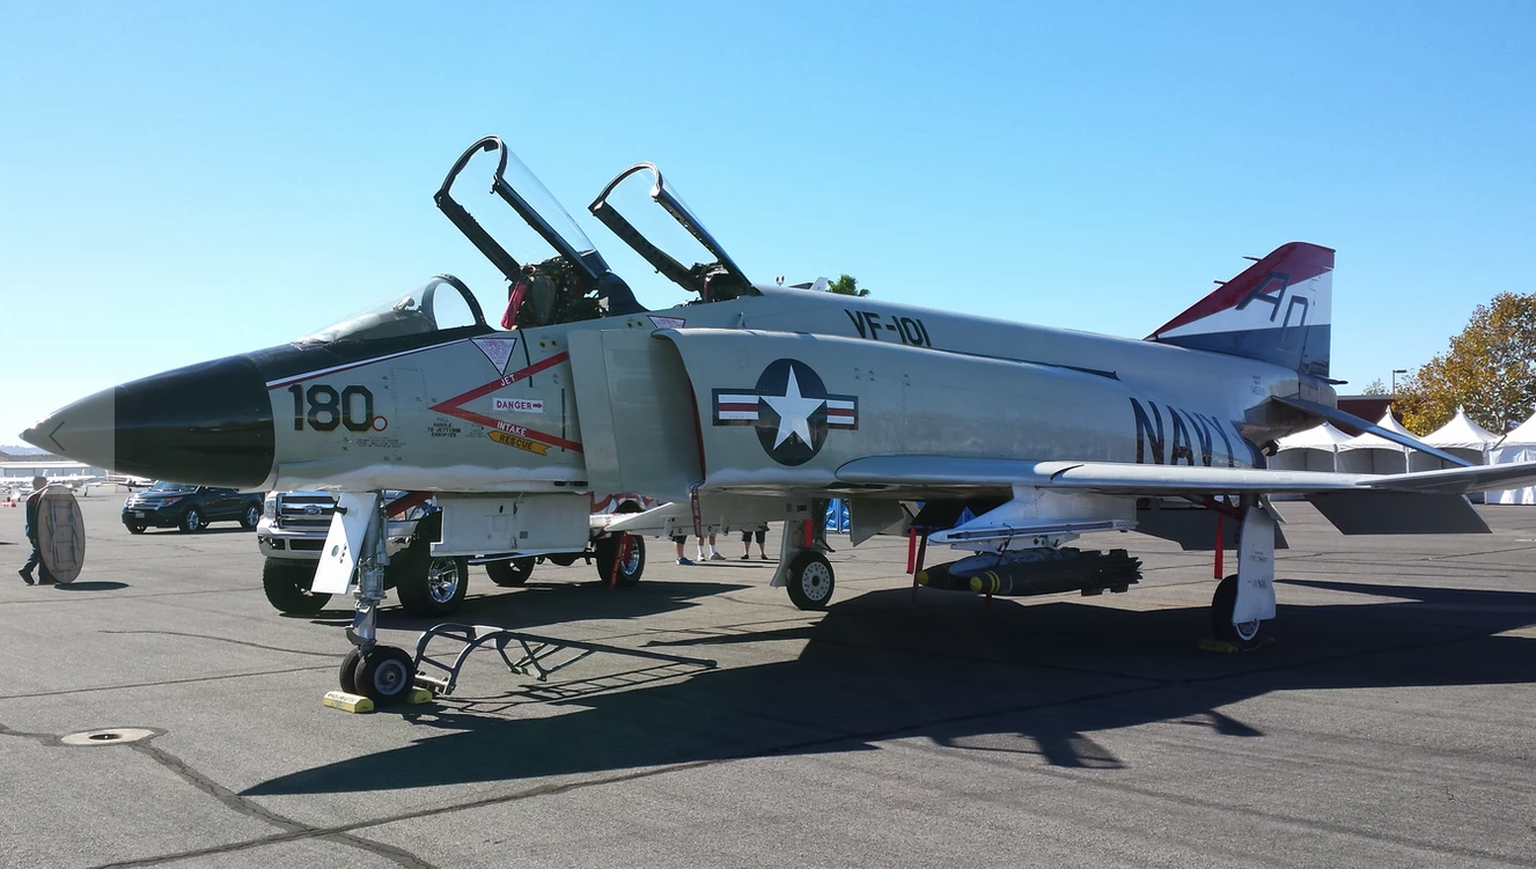 1959 McDonnell F4H-1F Phantom II
s/n 150310 N815WF
&quot;World&#039;s Only Privately Owned F-4 Phantom Capable of Flight&quot; 
https://www.platinumfighters.com/inventory-2/1959-mcdonnell-f4h-1f-phant ...